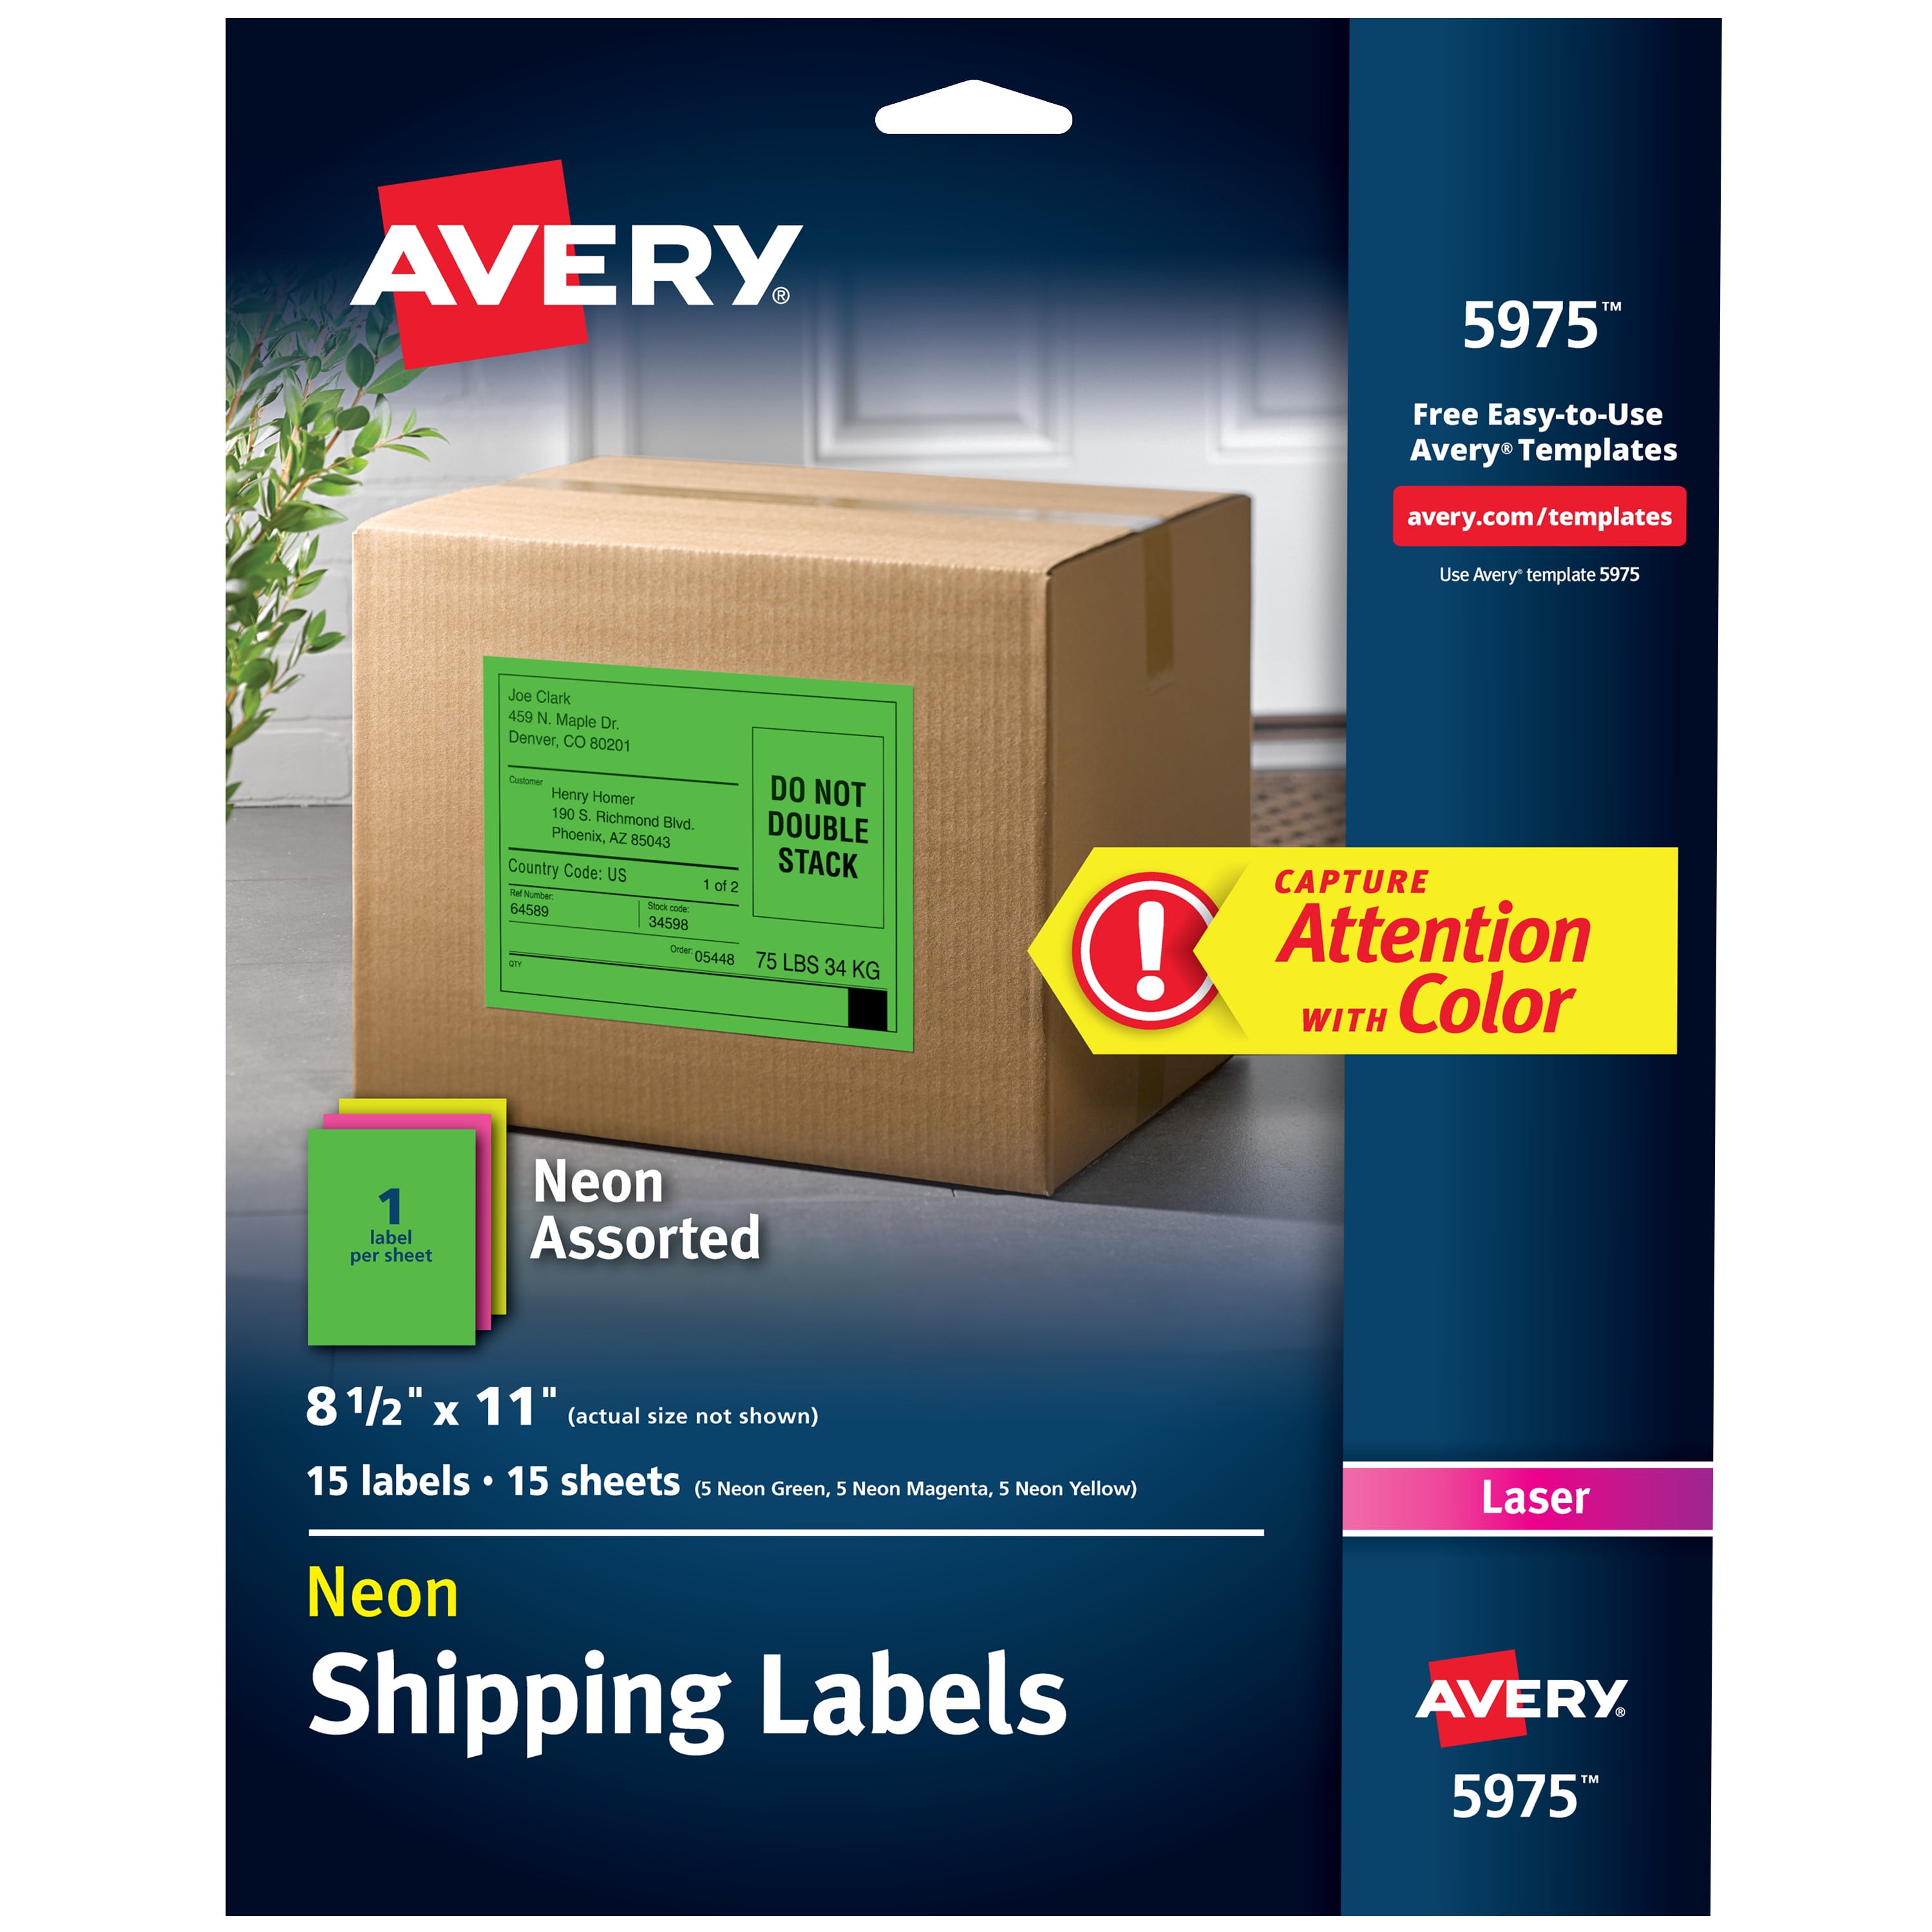 Avery Assorted Neon Shipping Labels, 81/2" x 11", 15 Labels (5975